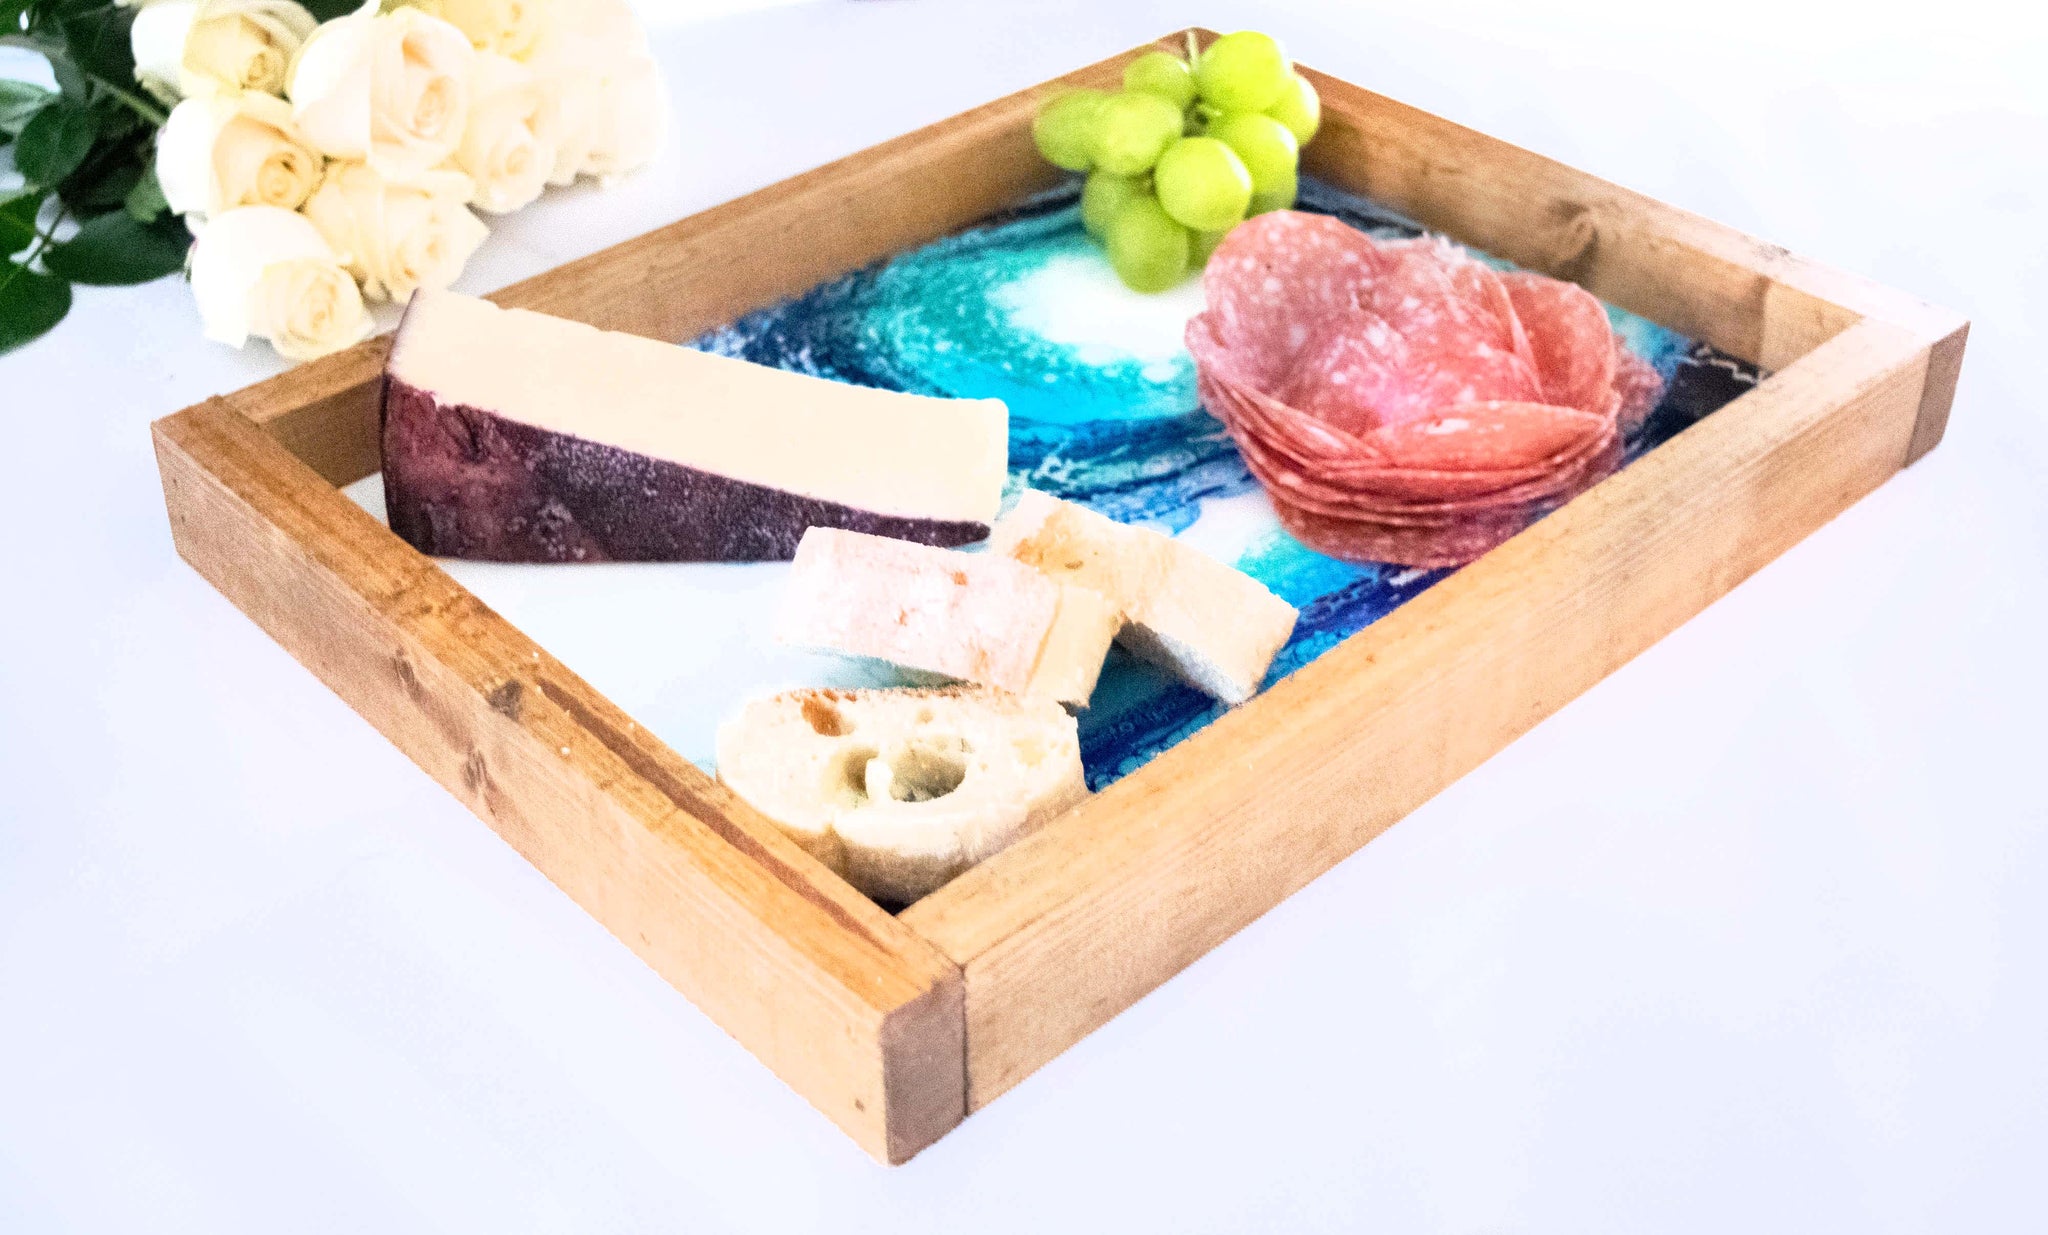 Large Resin Wood Serving Tray -   Serving tray wood, Food safe resin,  Tray